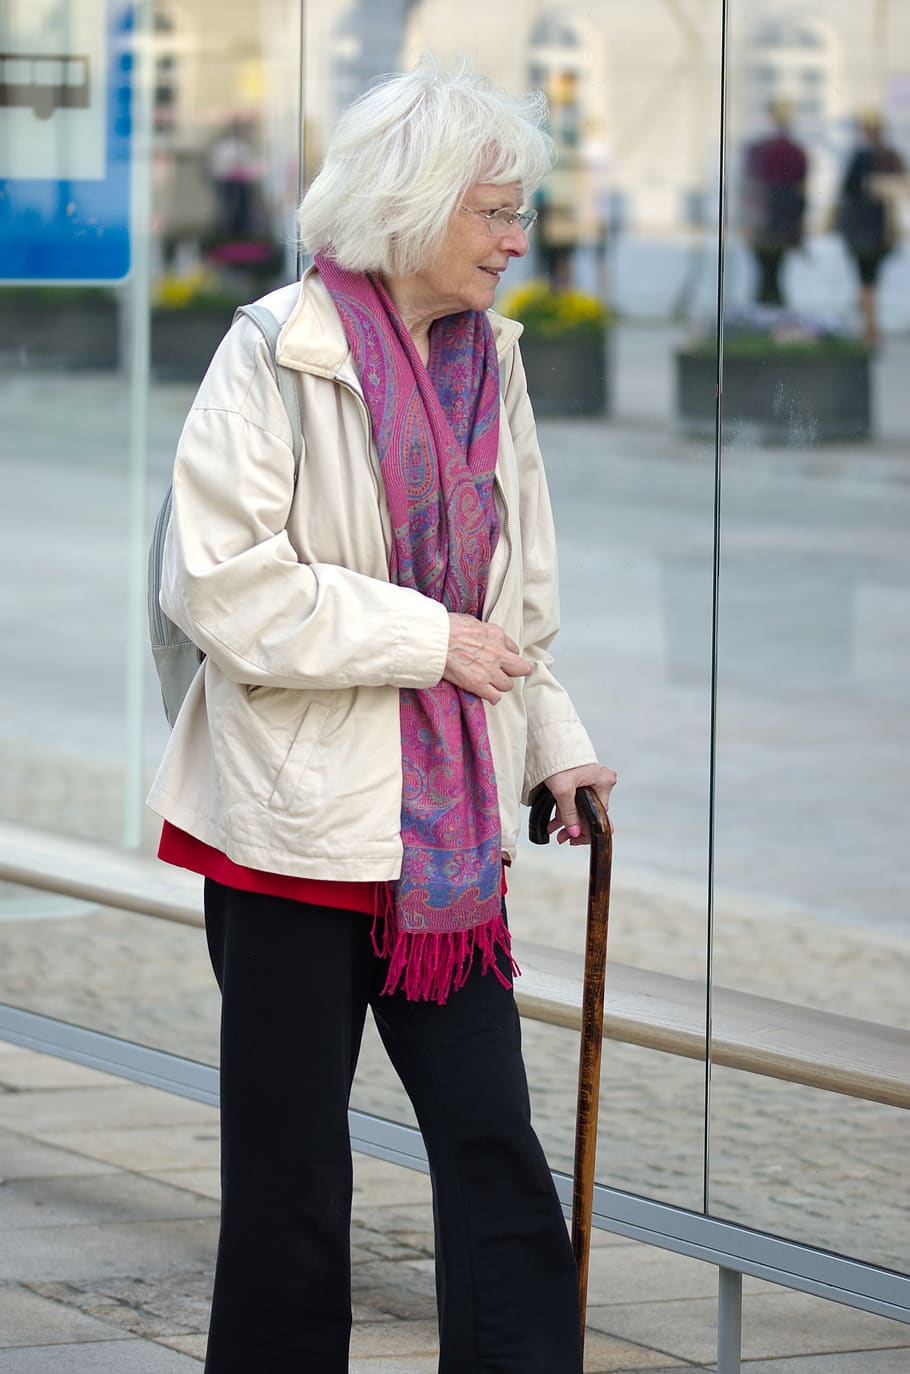 woman, old, in the age, the white hair, female, human, man, person, cane, going